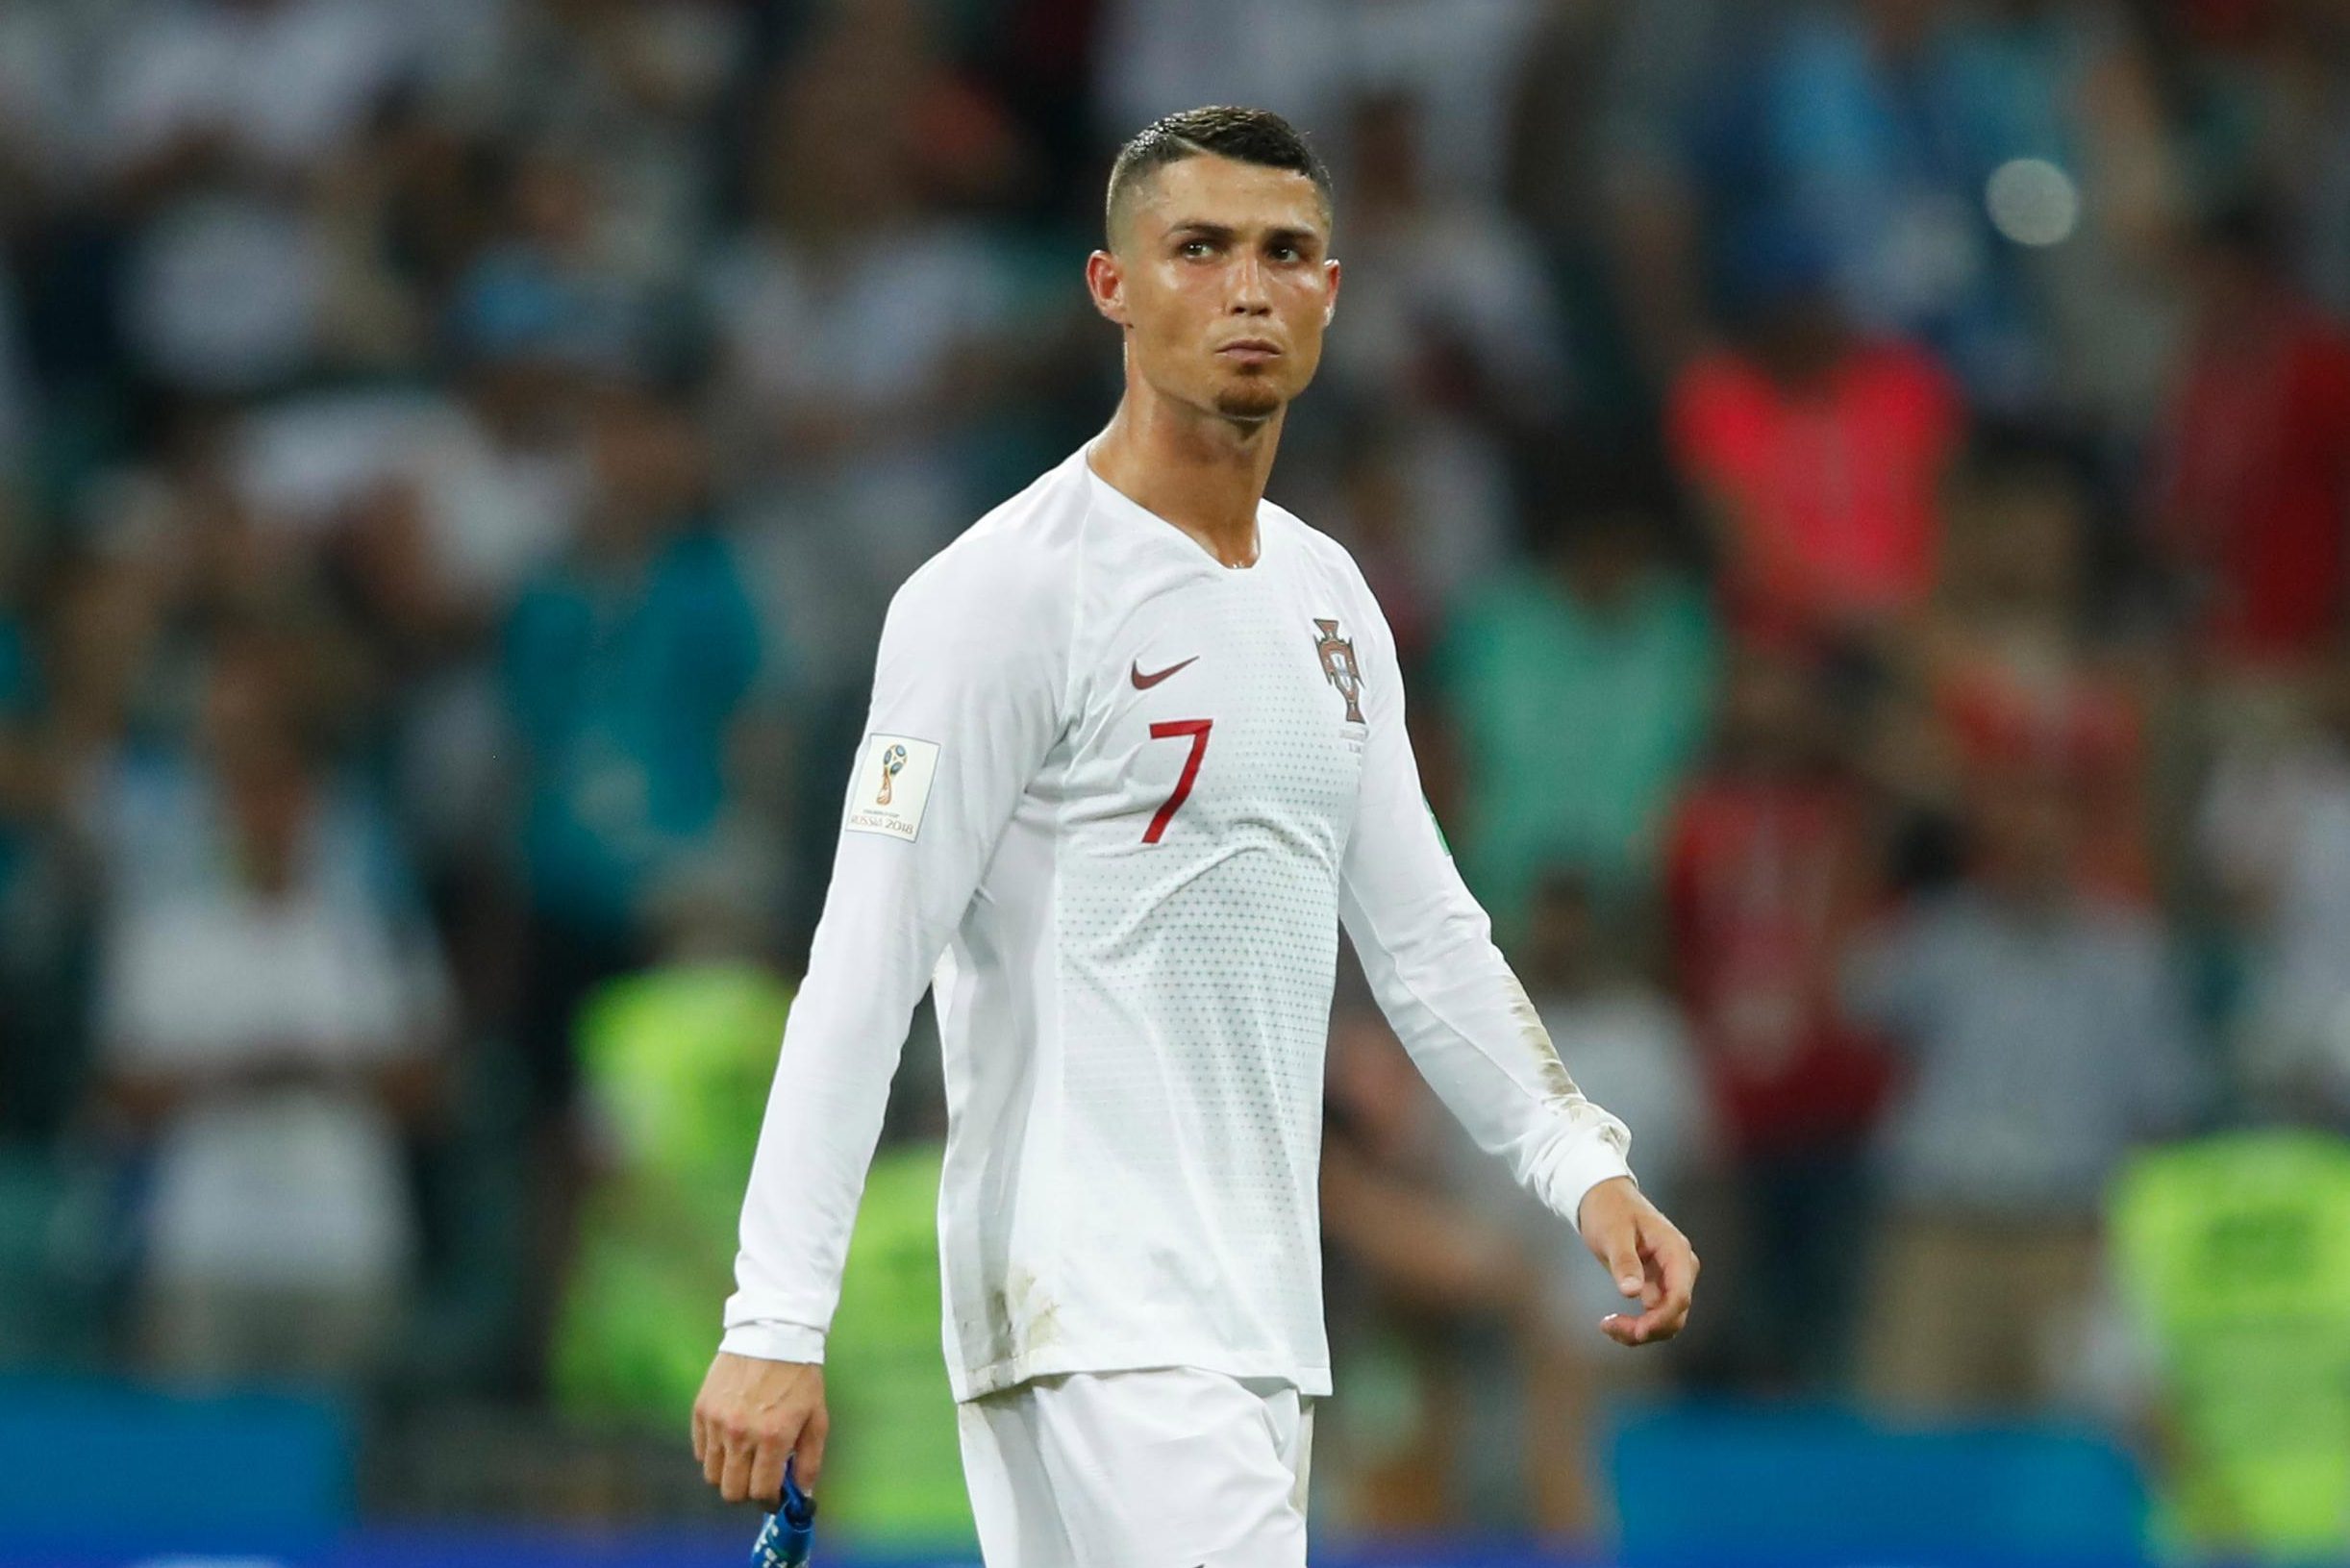 Cristiano Ronaldo: Real Madrid superstar says 'it is not the time' to discuss Portugal career